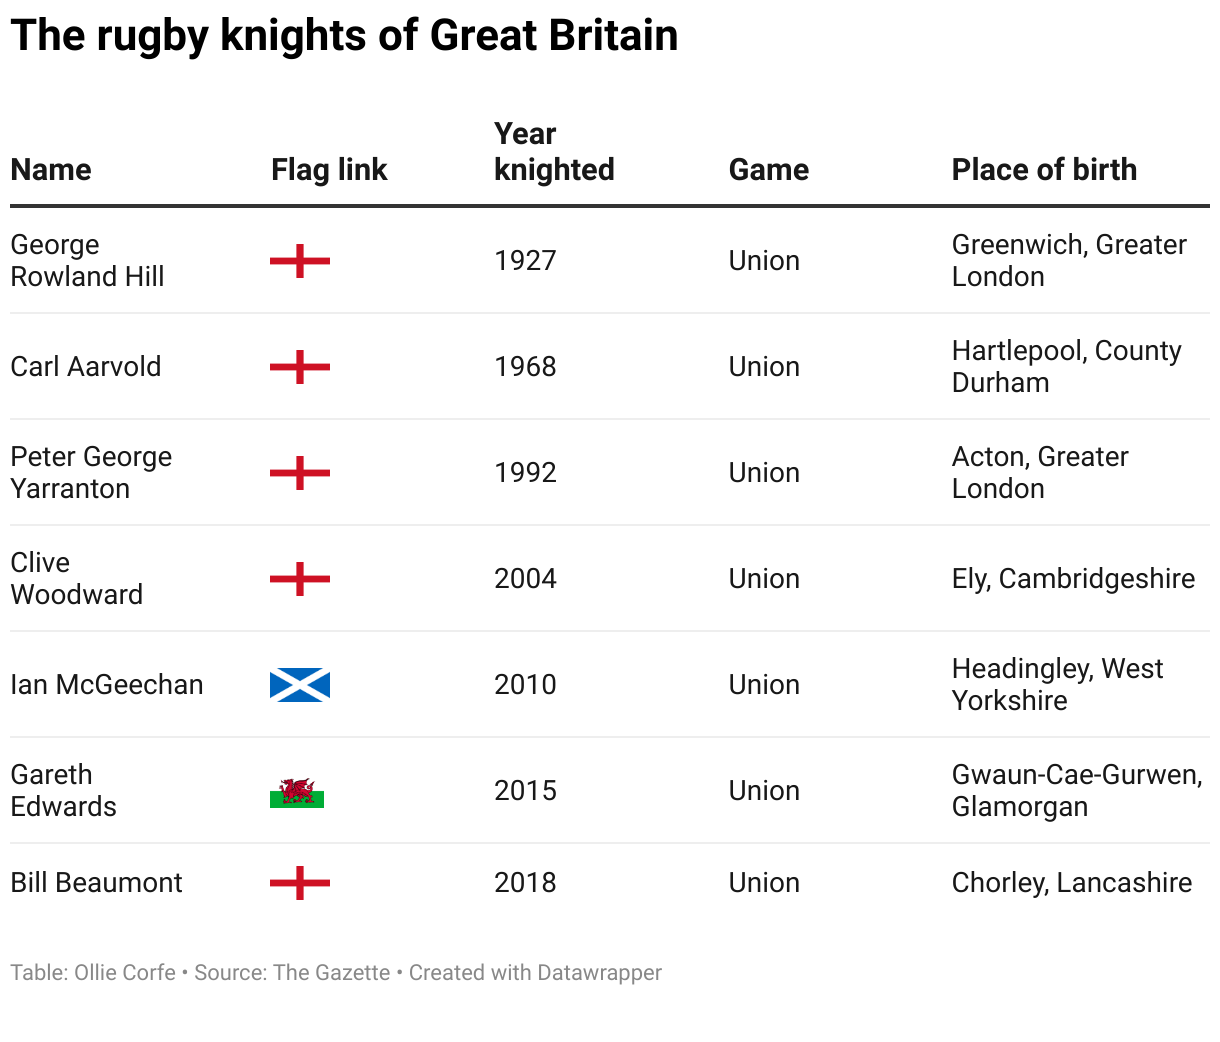 Table of knighted rugby players.